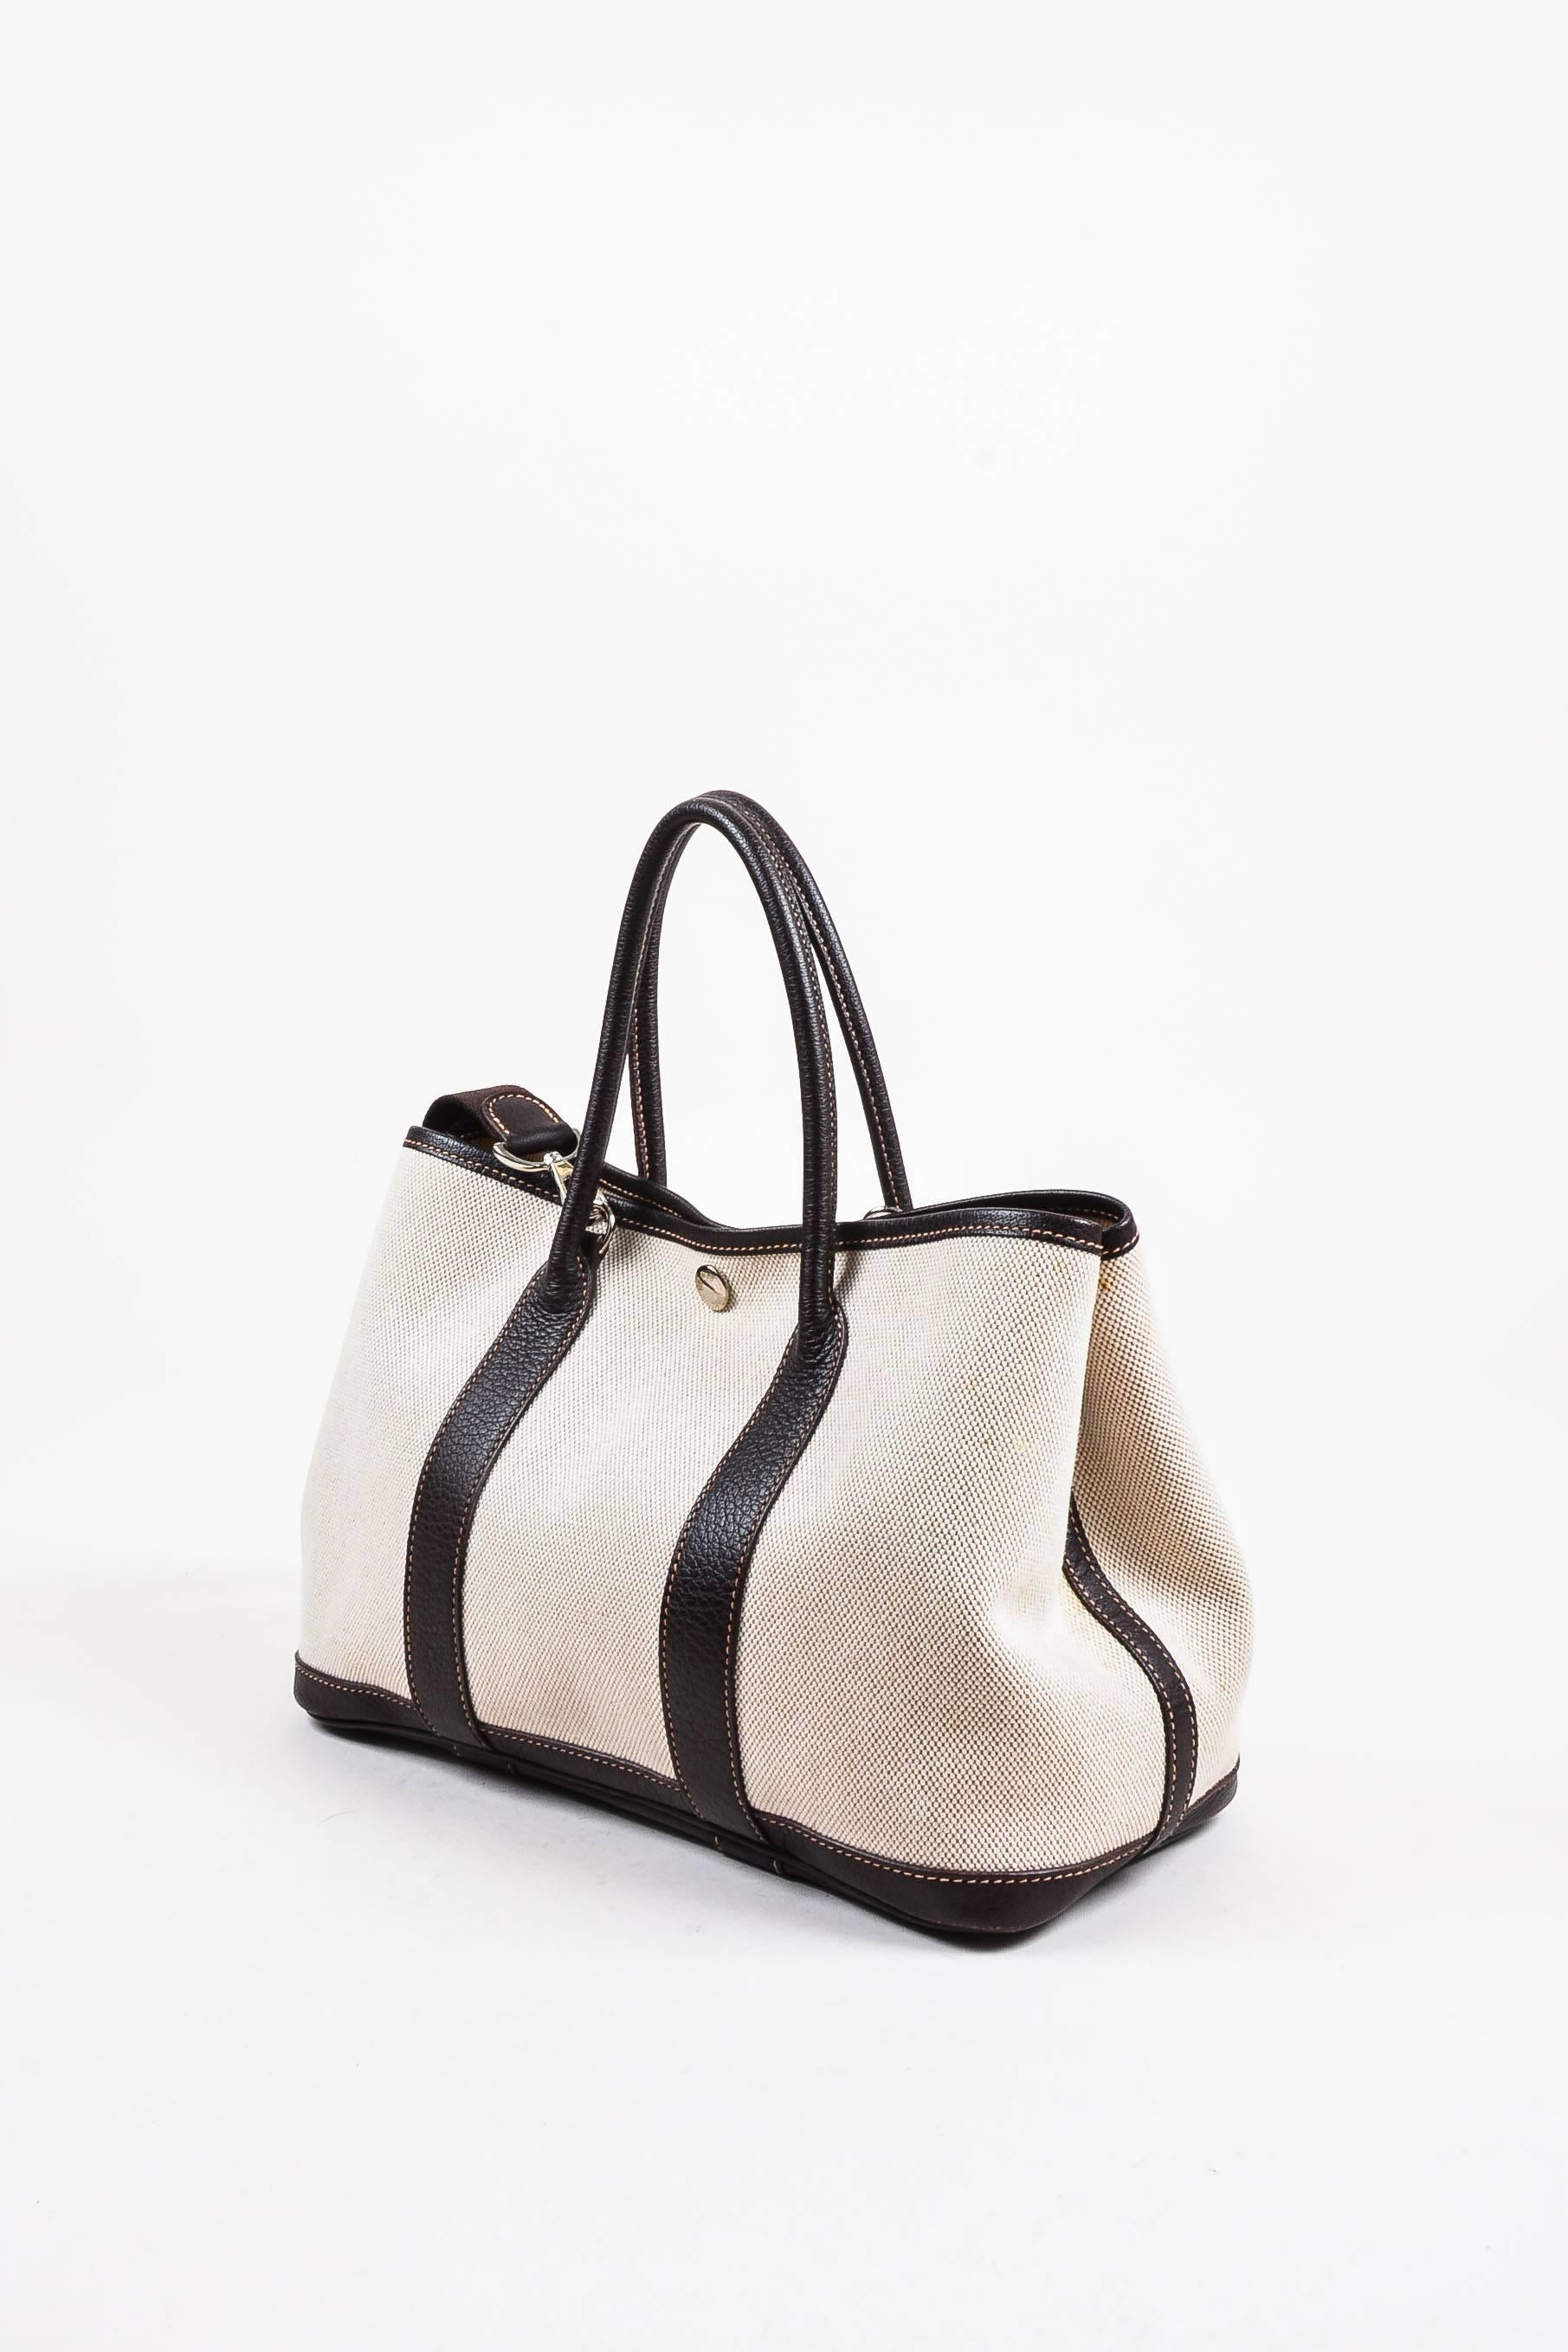 Retailed for $1,900. Released circa 2005. The perfect weekend bag, the TPM 